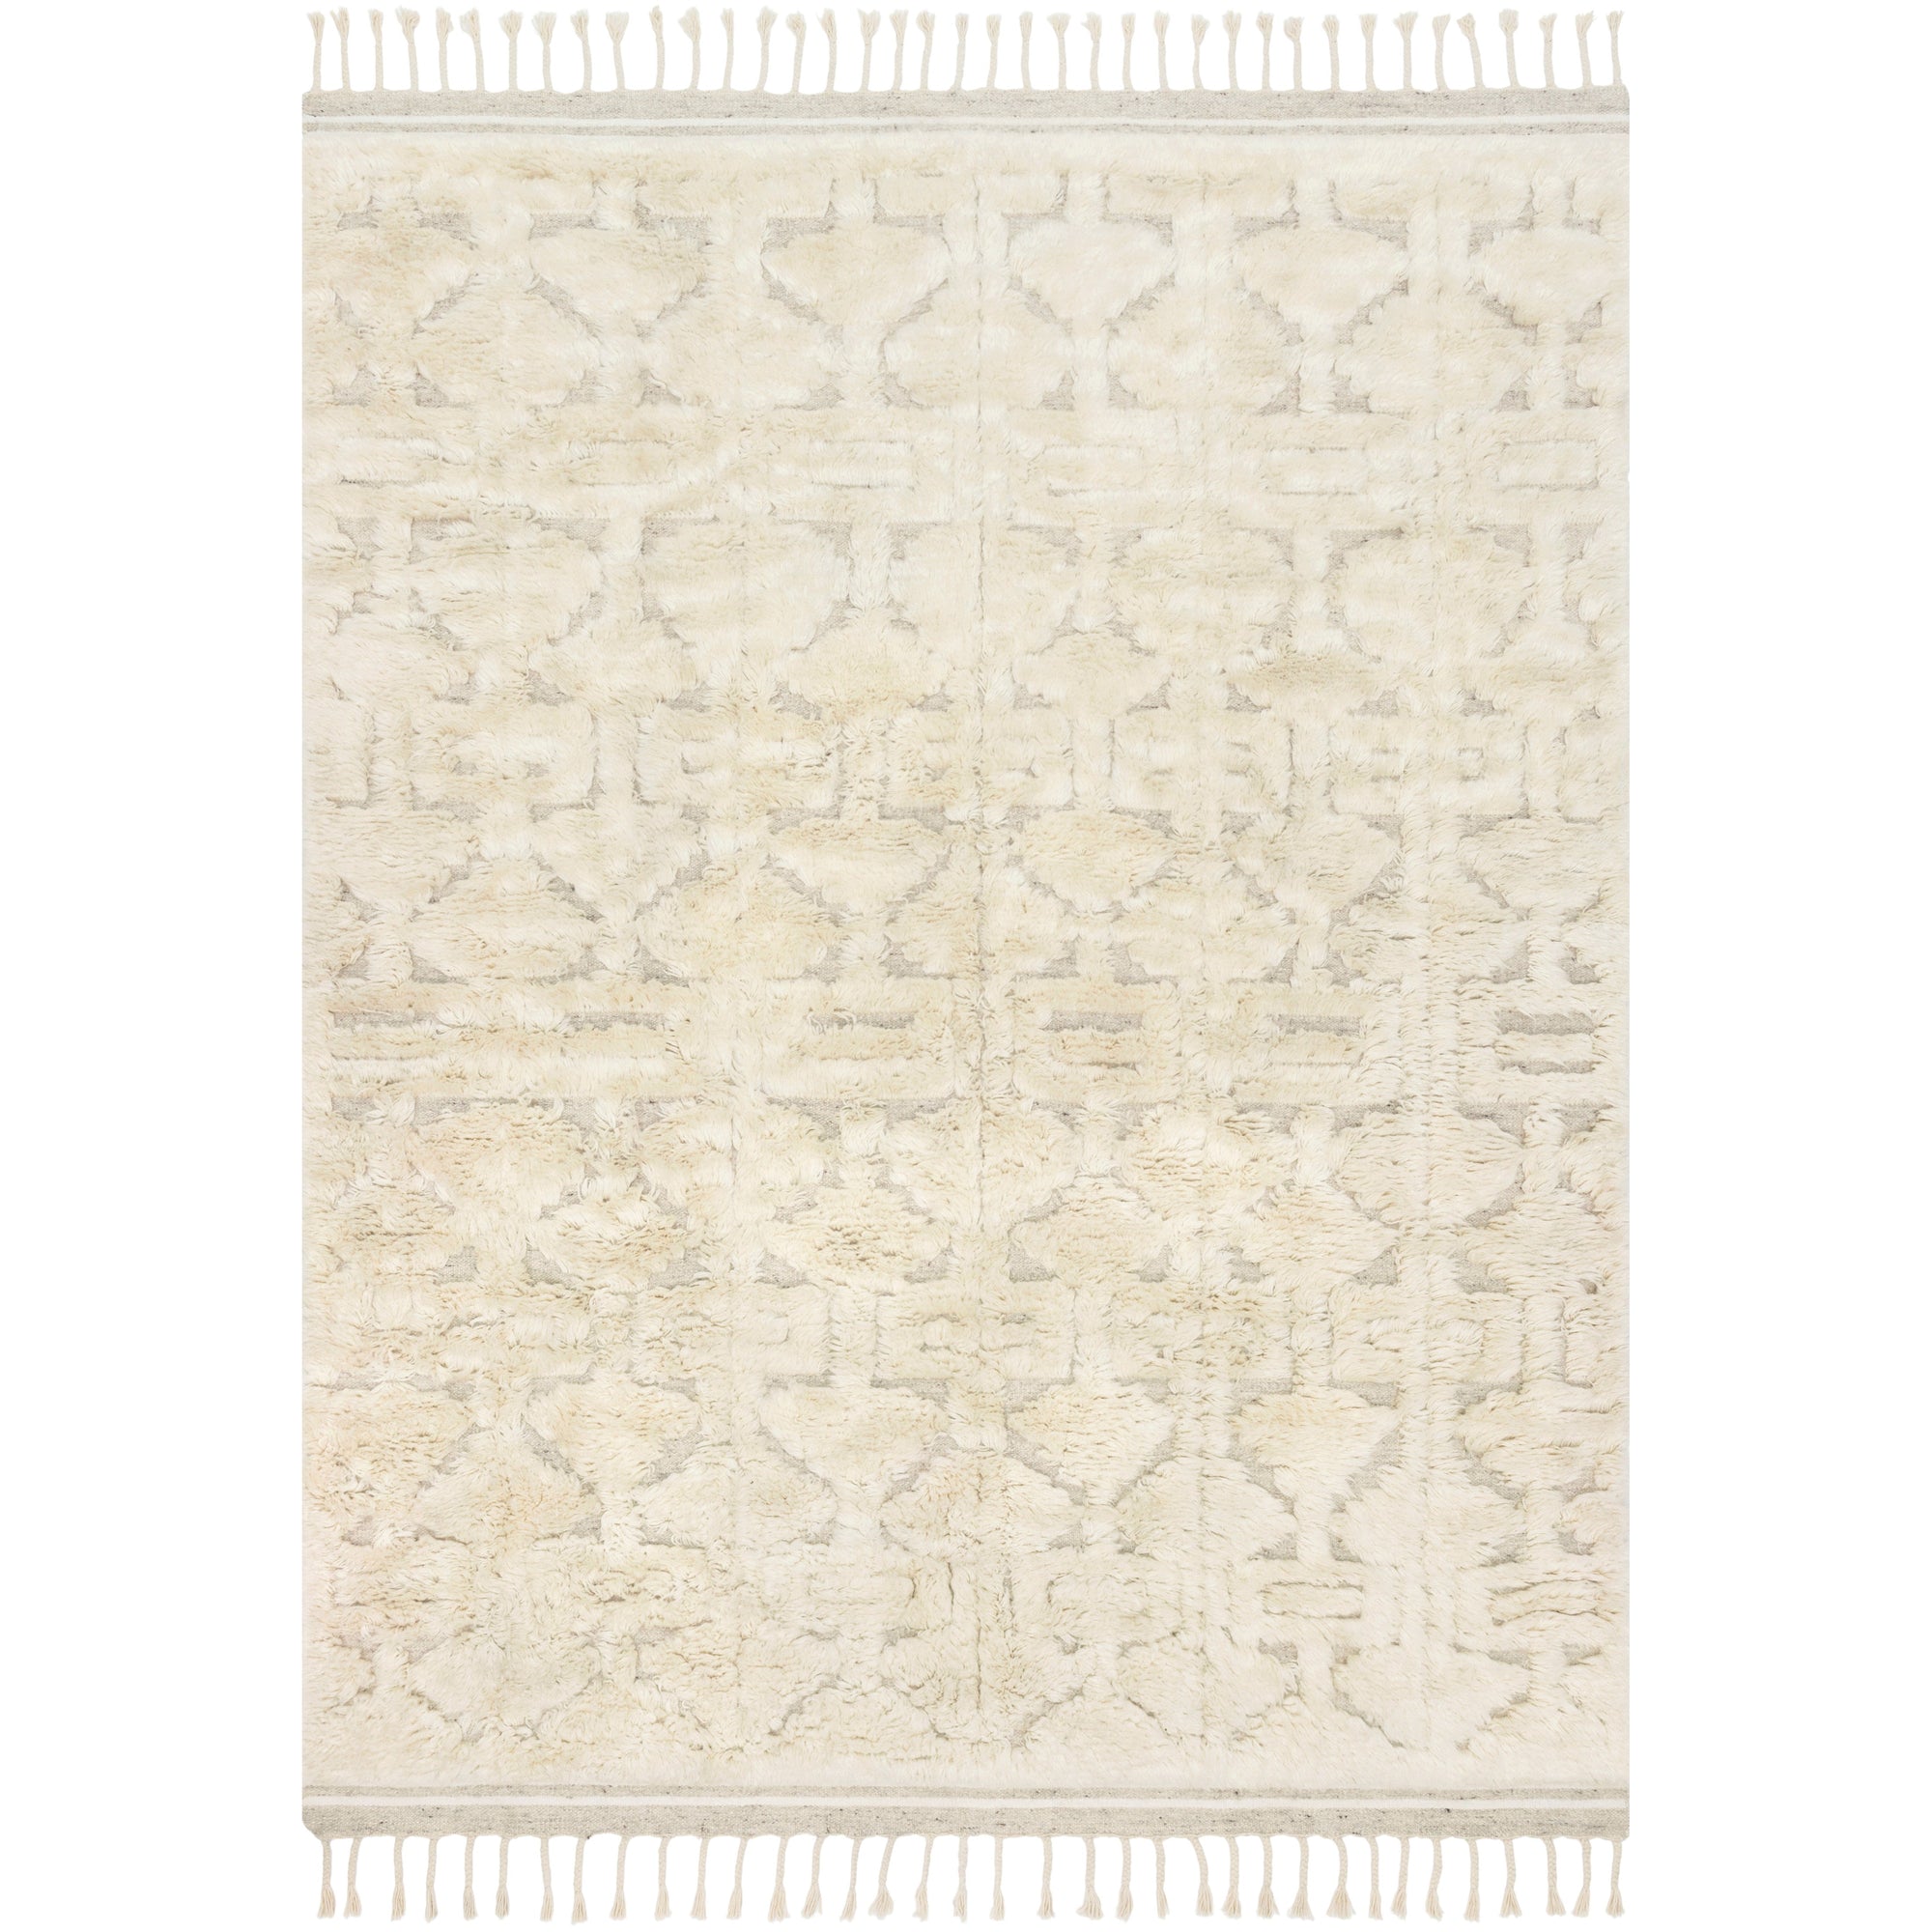 Rugs by Roo Loloi Hygge Oatmeal Ivory Area Rug in size 18" x 18" Sample